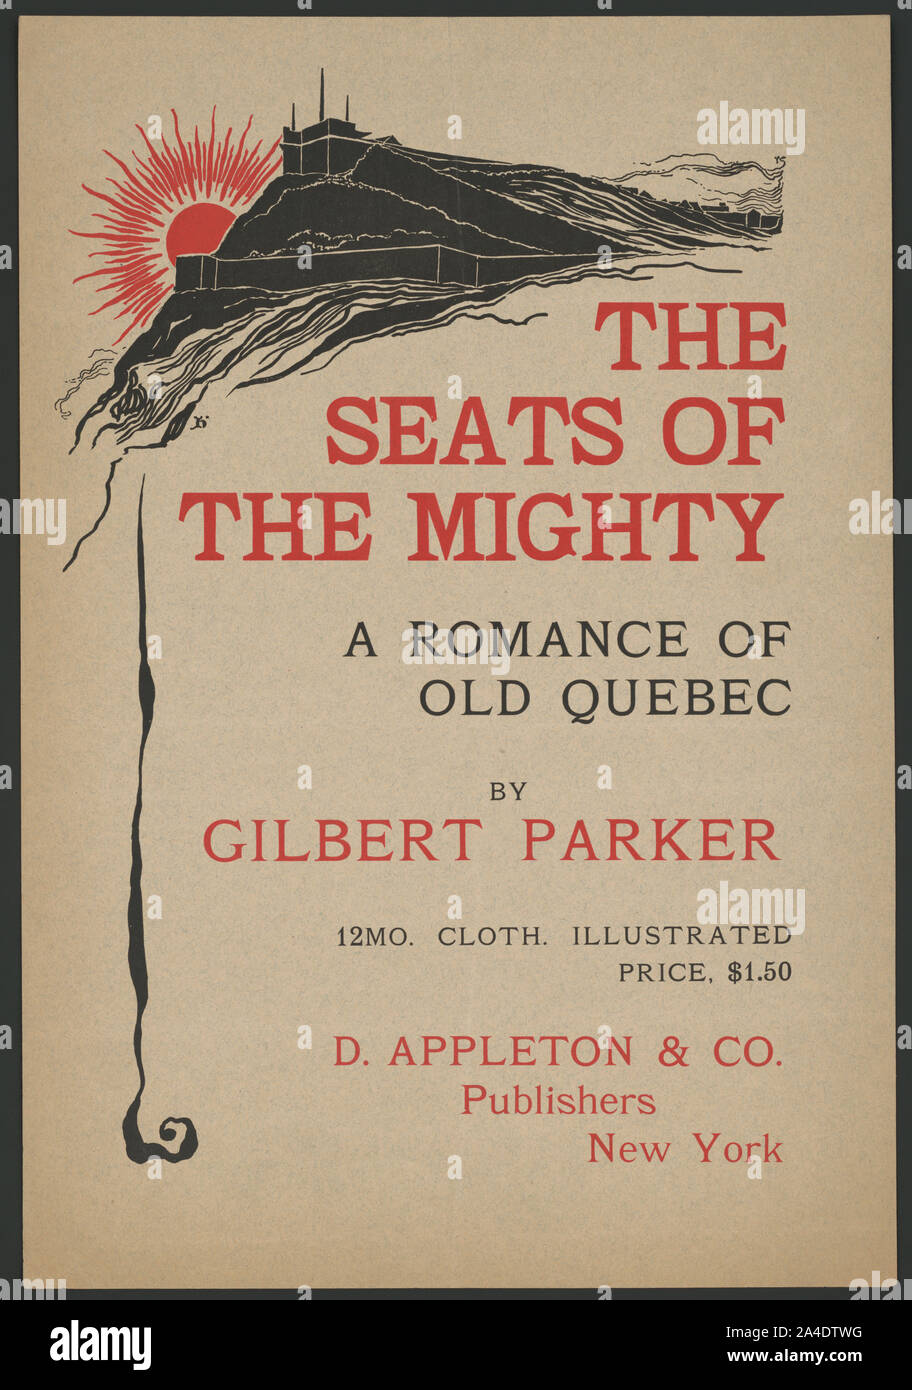 The seats of the mighty, a romance of old Quebec by Gilbert Parker ... D. Appleton & Co., publishers, New York / H. Stock Photo